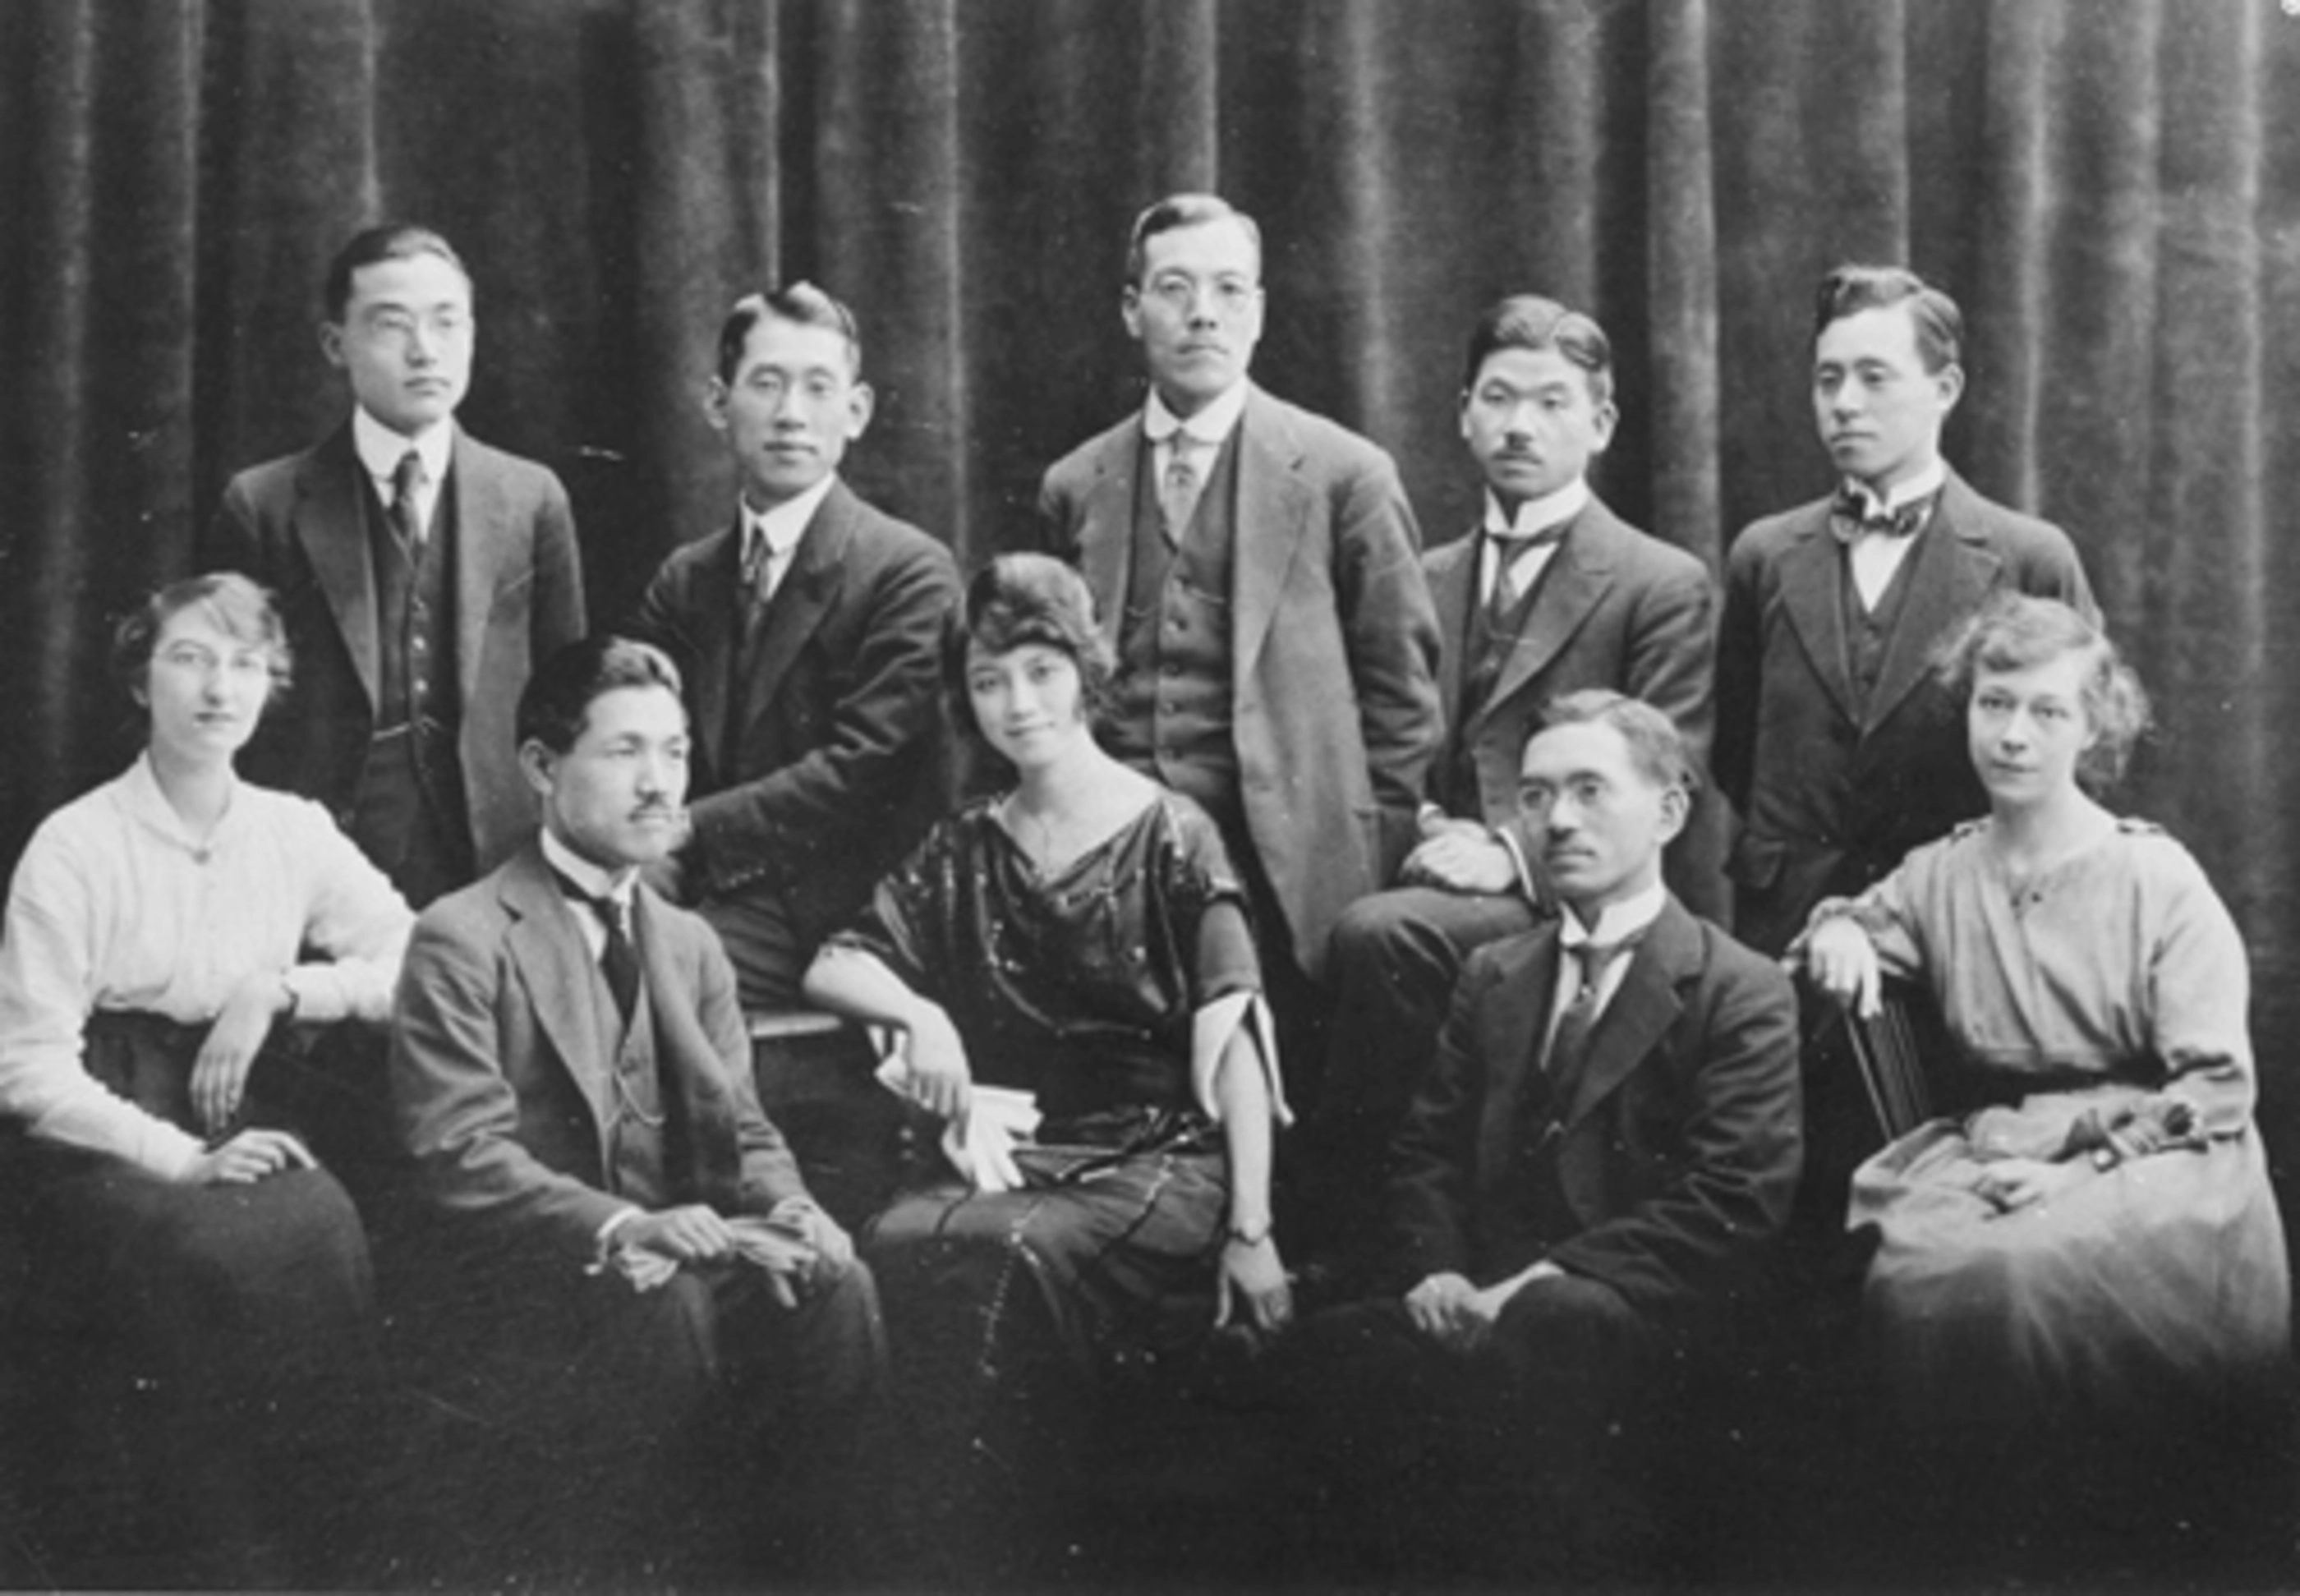 Employees assigned to the London office, around 1919 (Tokutaro Nagase second from left in front row)